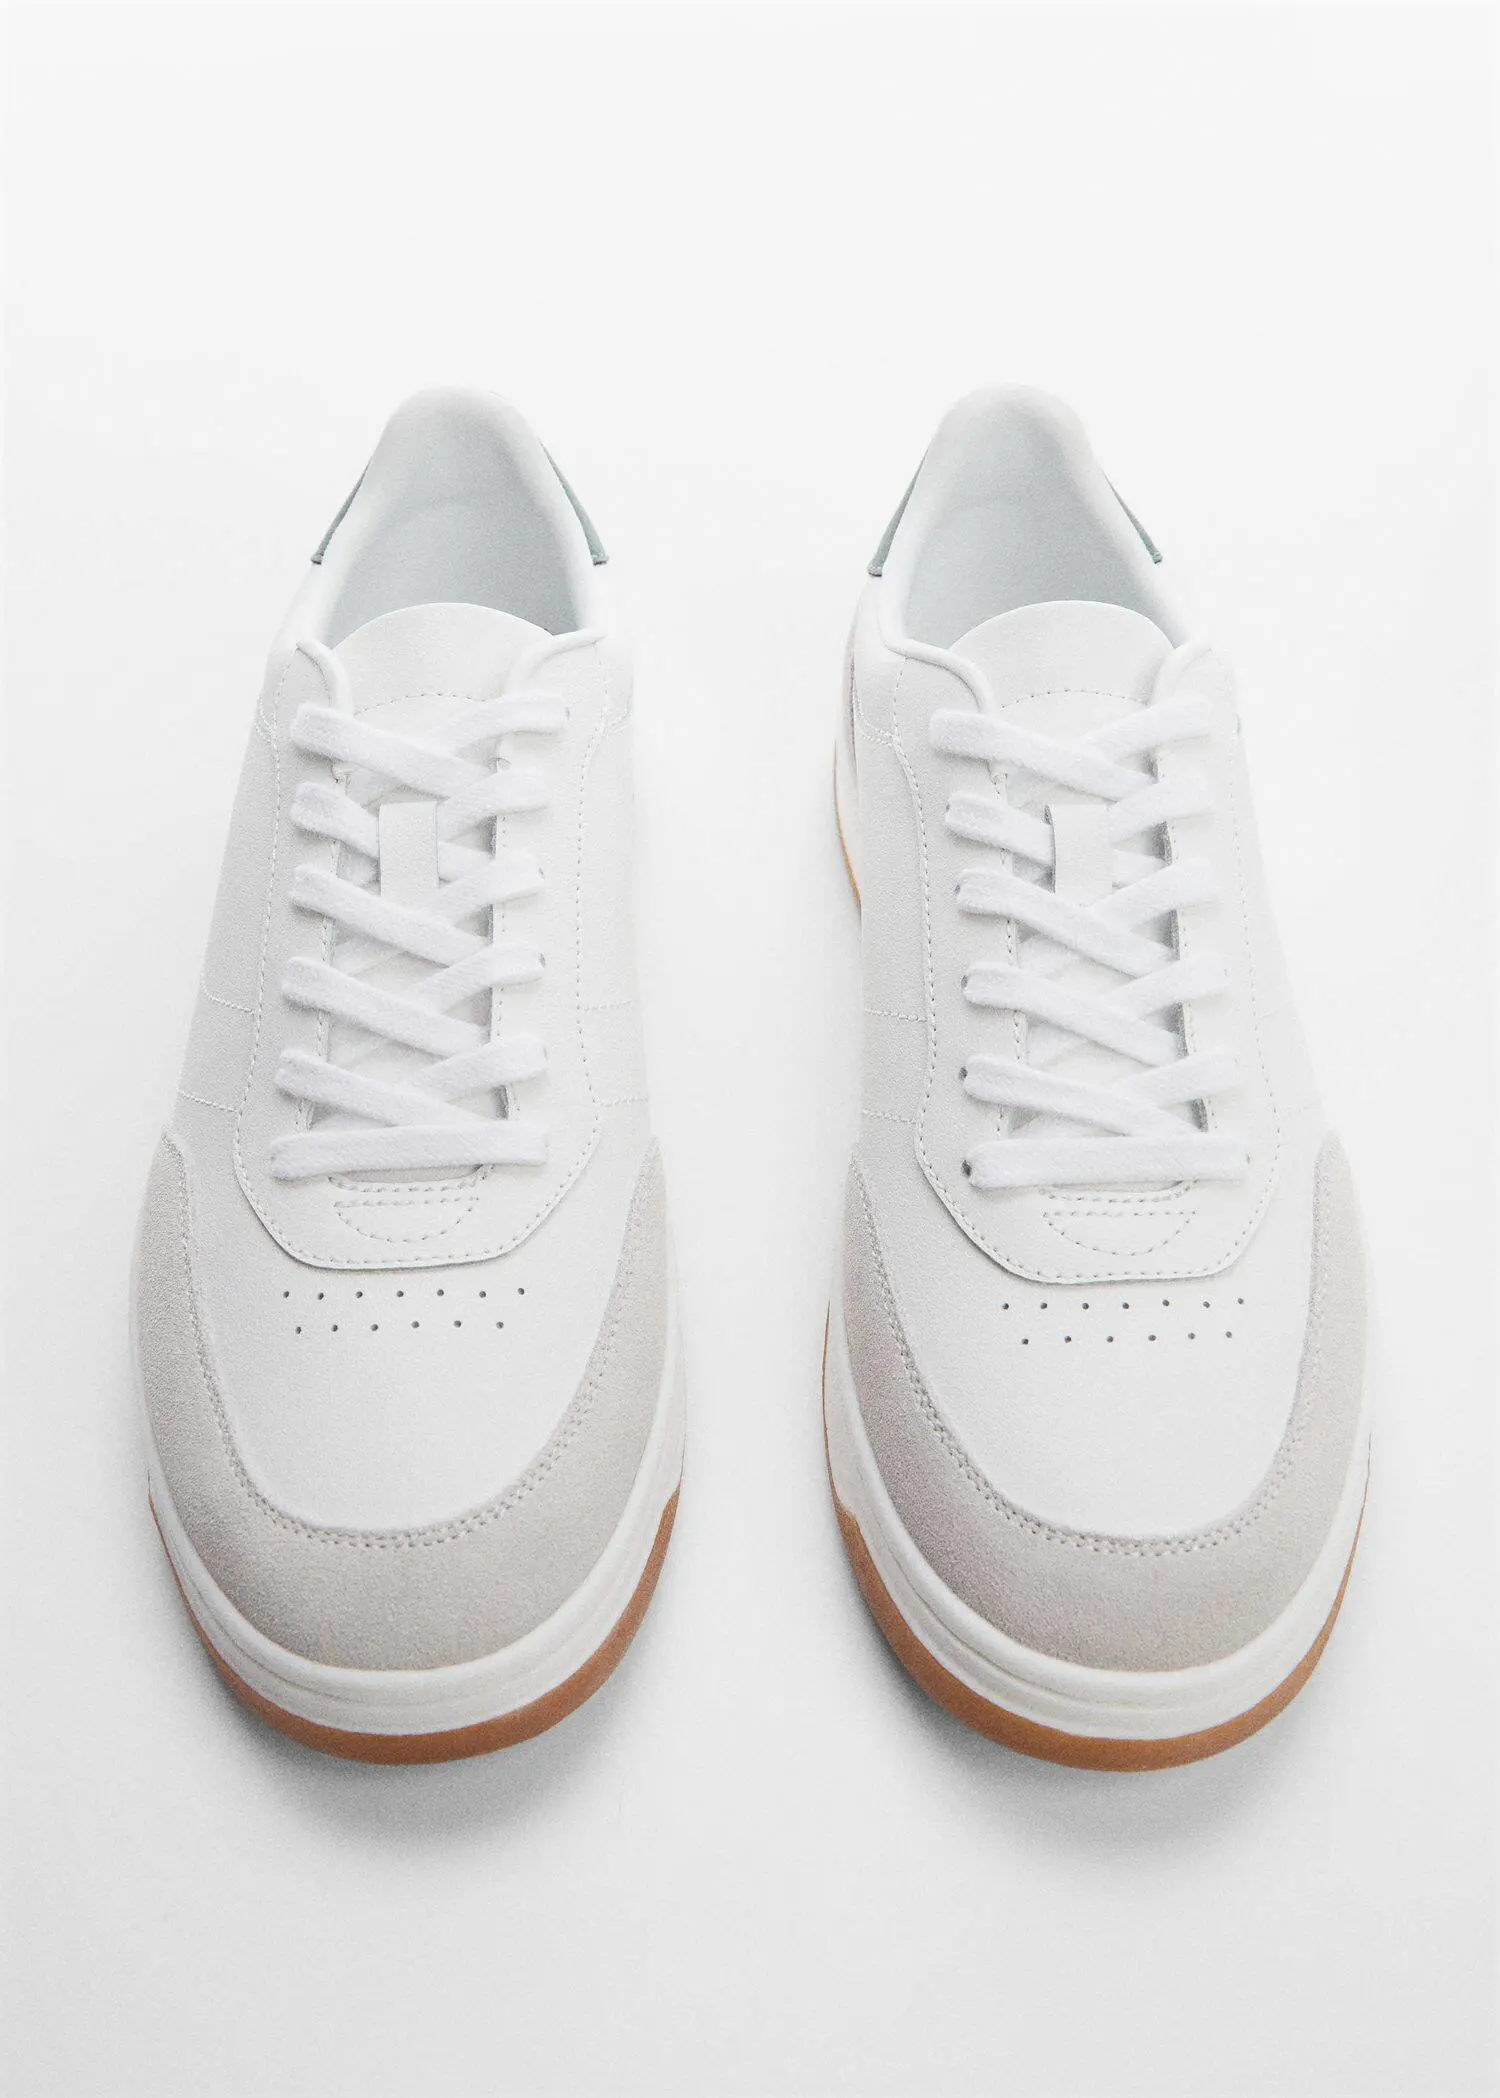 Mango Leather mixed sneakers. a pair of white sneakers on top of a white surface. 